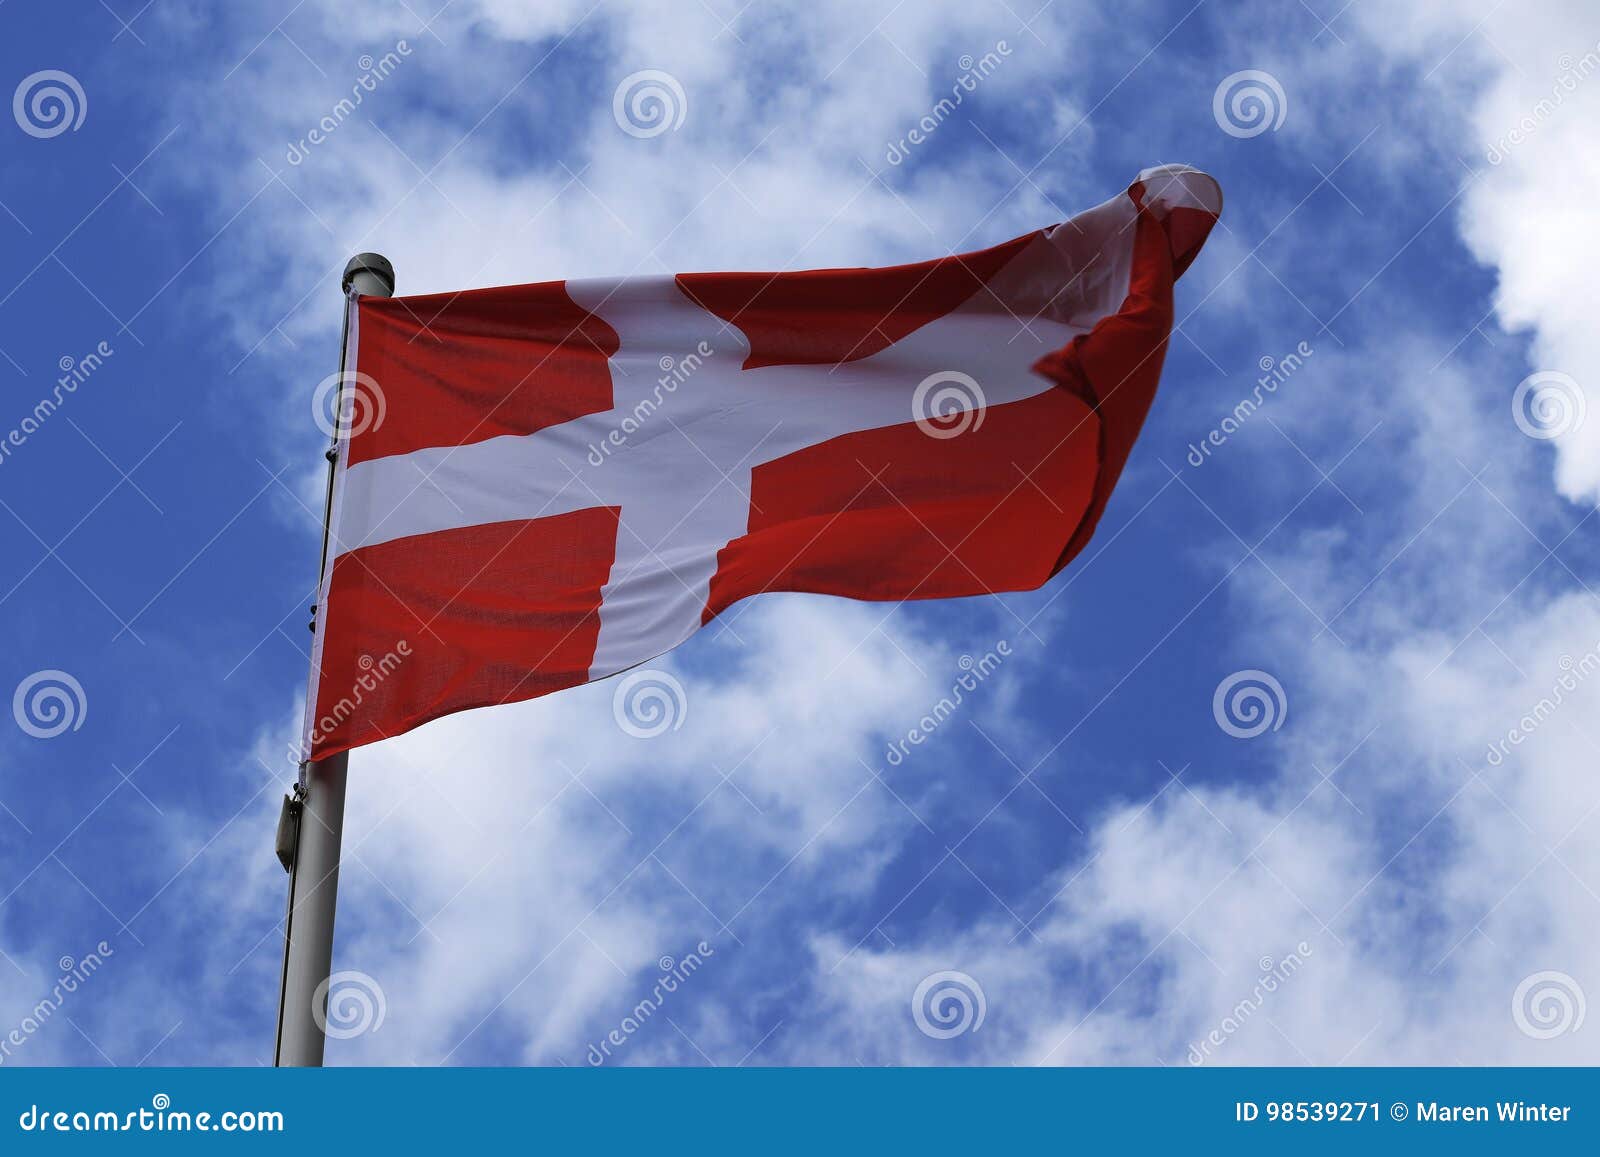 Flag of Denmark, White Cross on a Red Background, National Symbol Stock  Image - Image of outdoor, country: 98539271